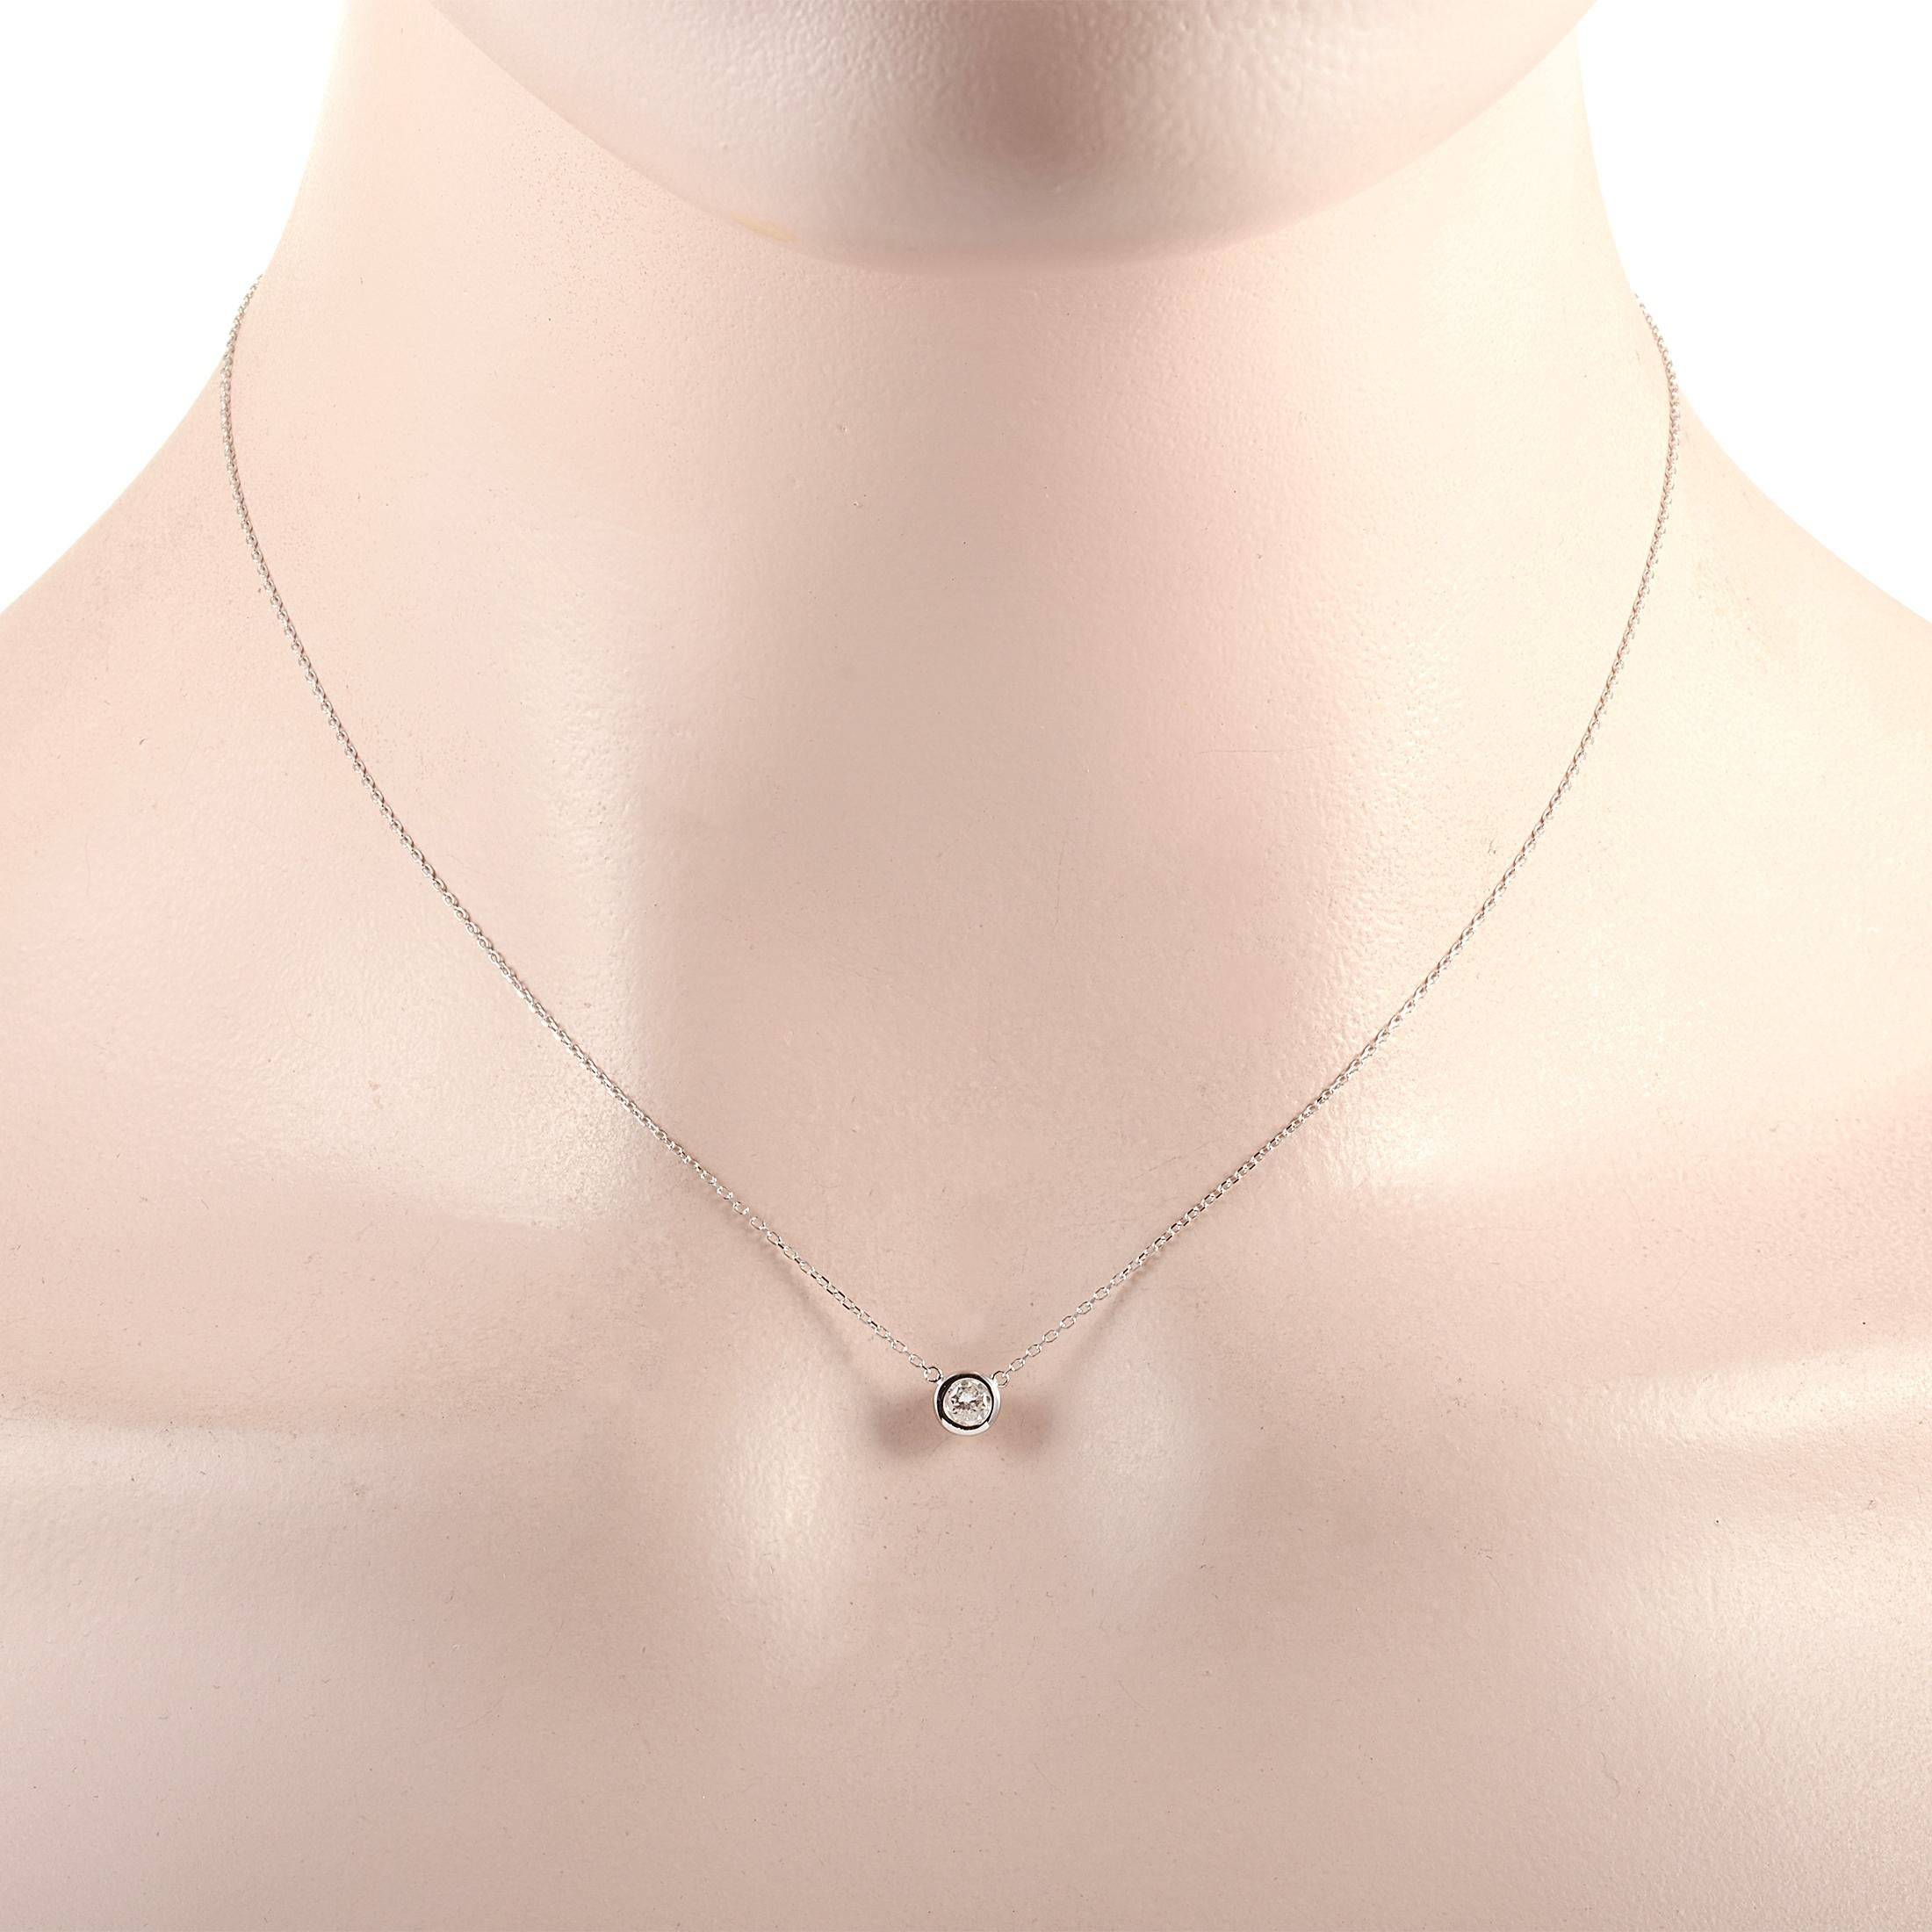 This LB Exclusive necklace is crafted from 14K white gold and weighs 1.4 grams. It is presented with a 15” chain and boasts a pendant that measures 0.13” in length and 0.13” in width. The necklace is set with a 0.20 ct diamond stone.

Offered in